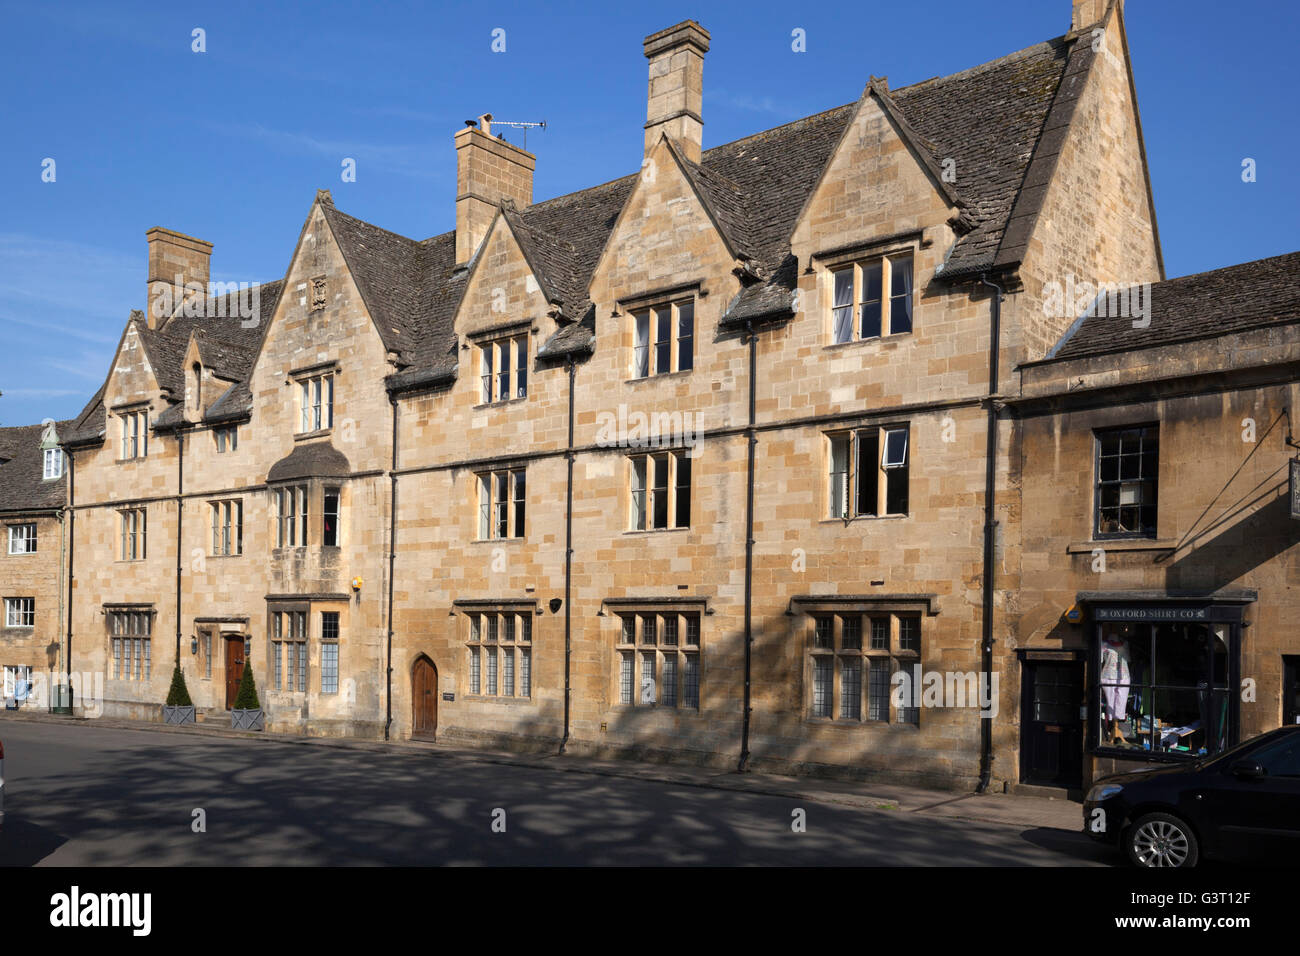 Old Grammar School, Chipping Campden, Cotswolds, Gloucestershire, Angleterre, Royaume-Uni, Europe Banque D'Images